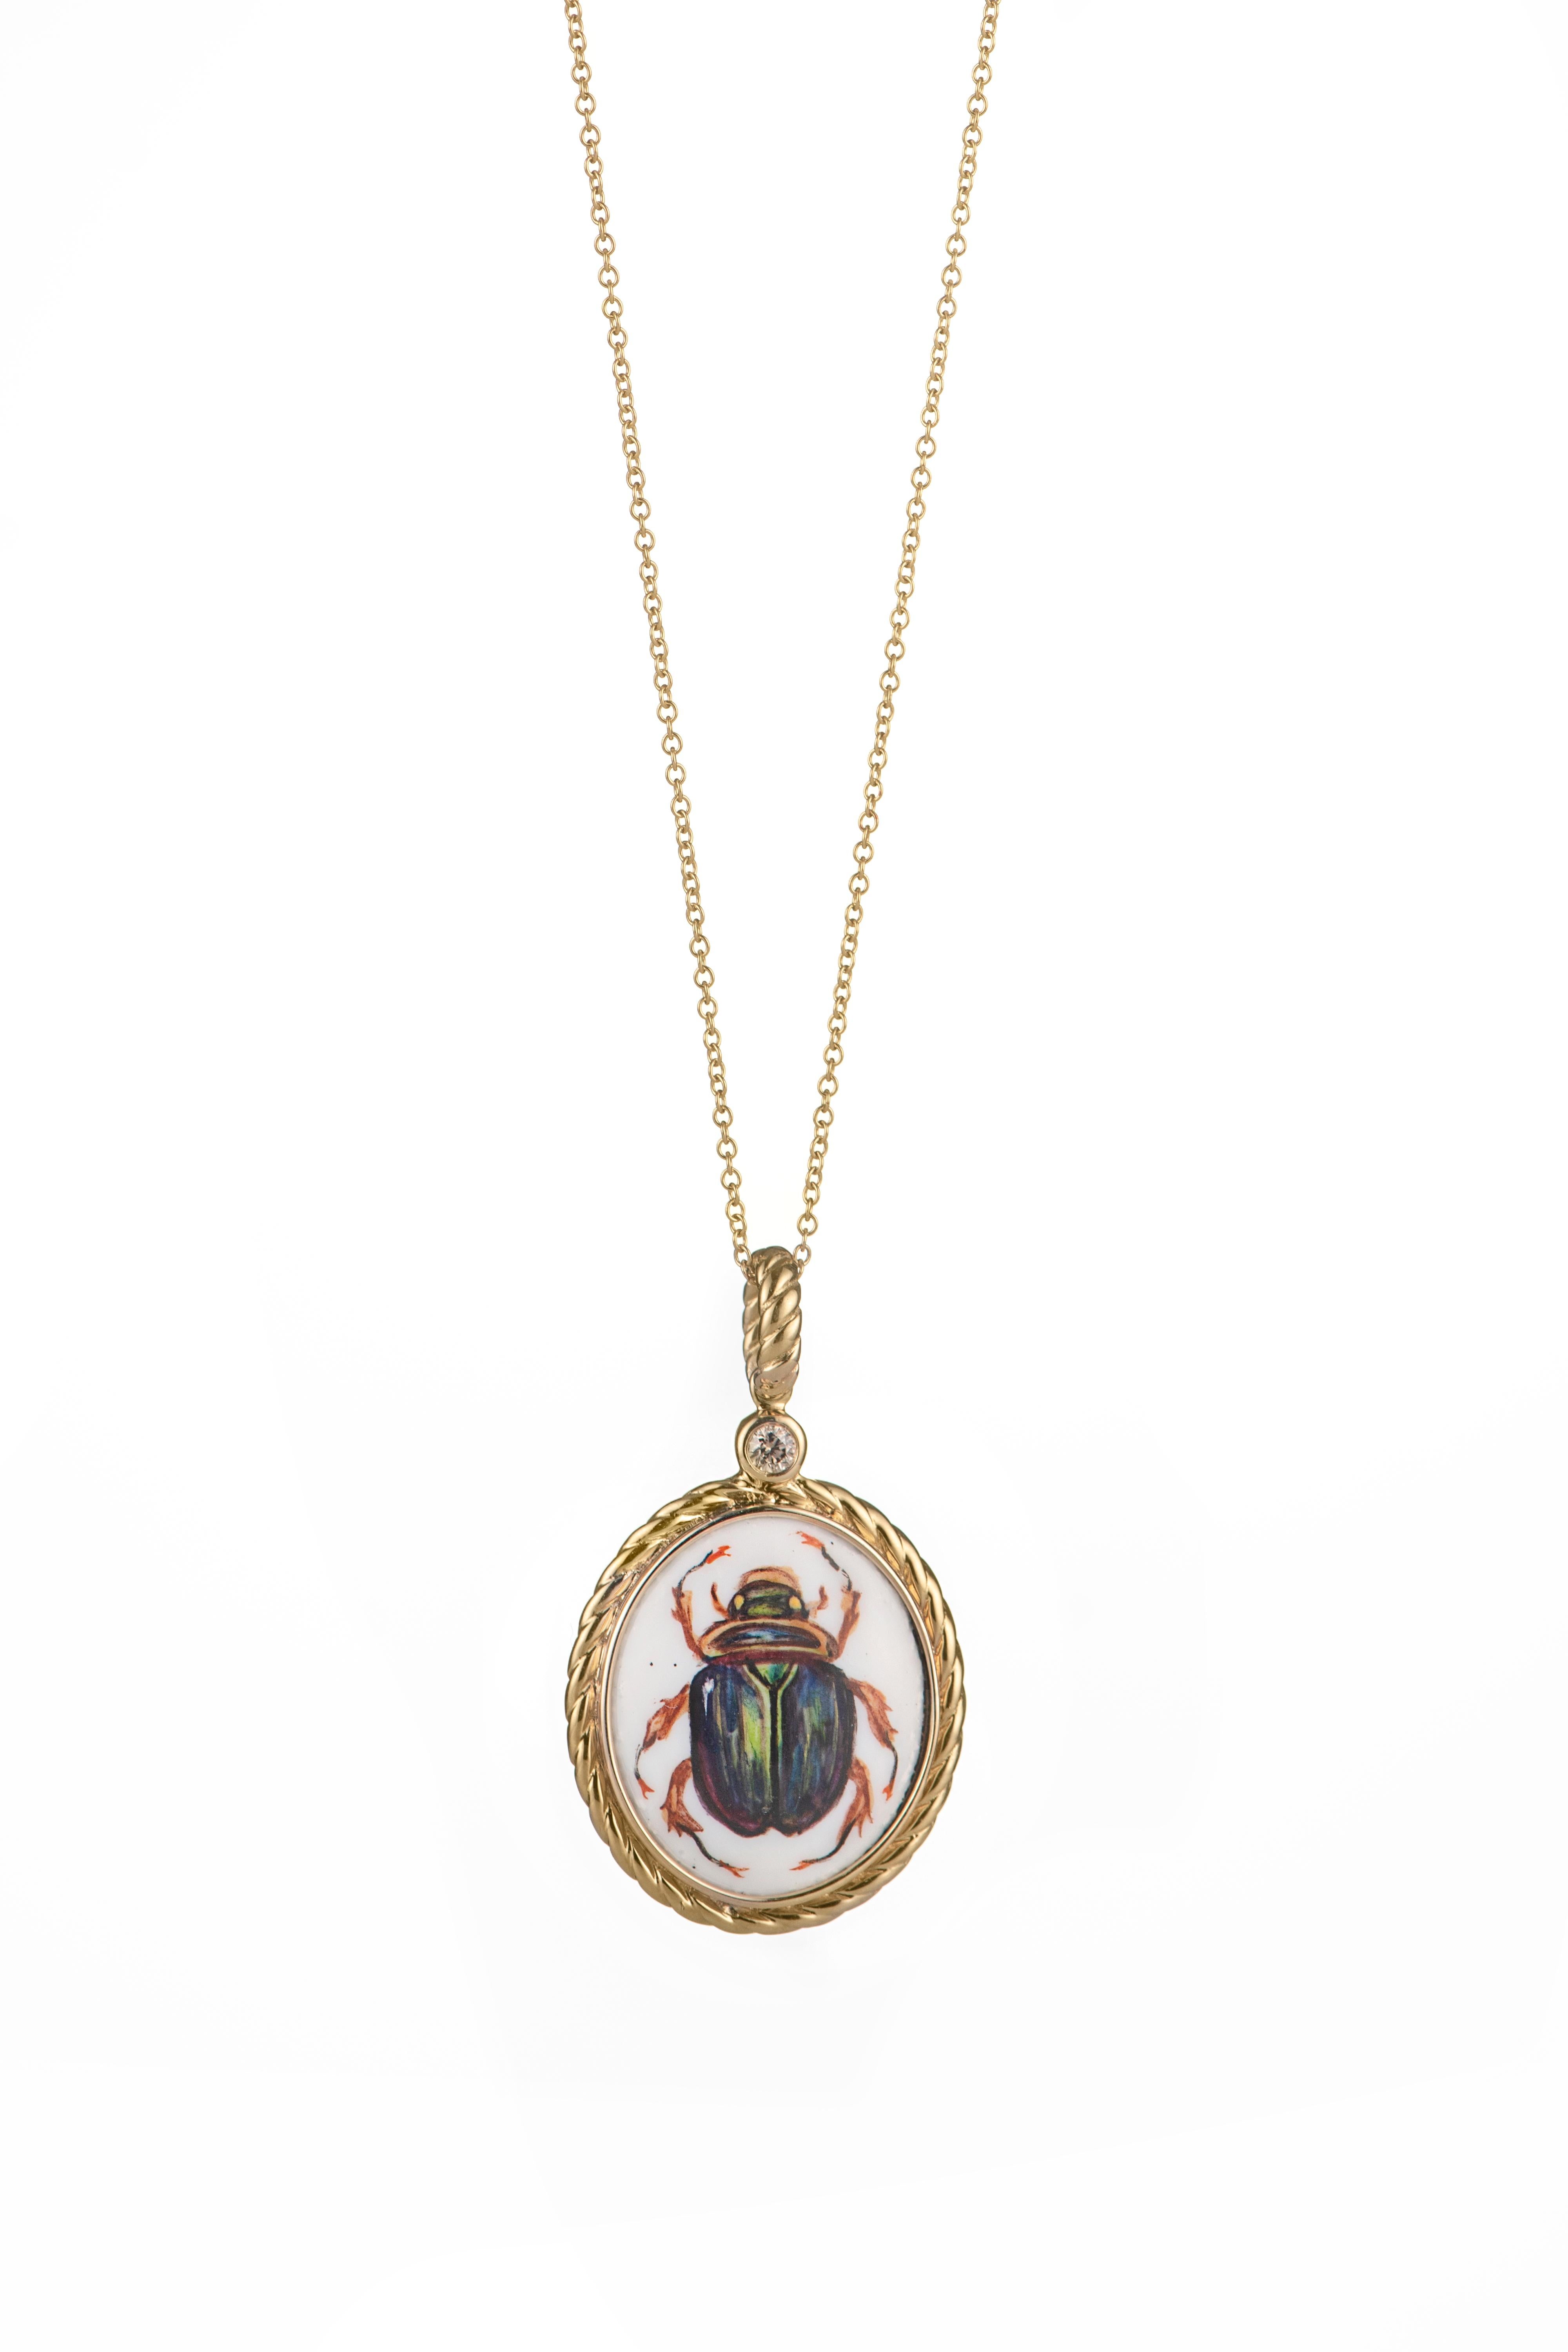 14K Yellow Gold
Hand-painted Enamel Scarab
0.035ct brilliant-cut Champagne Diamond
Pendant Measures: 1.7cm wide, 2.3cm tall
Chain Length: 45cm

The Scarab speaks BEGIN, the Heavenly Cycle, Rebirth, One’s Own Journey.